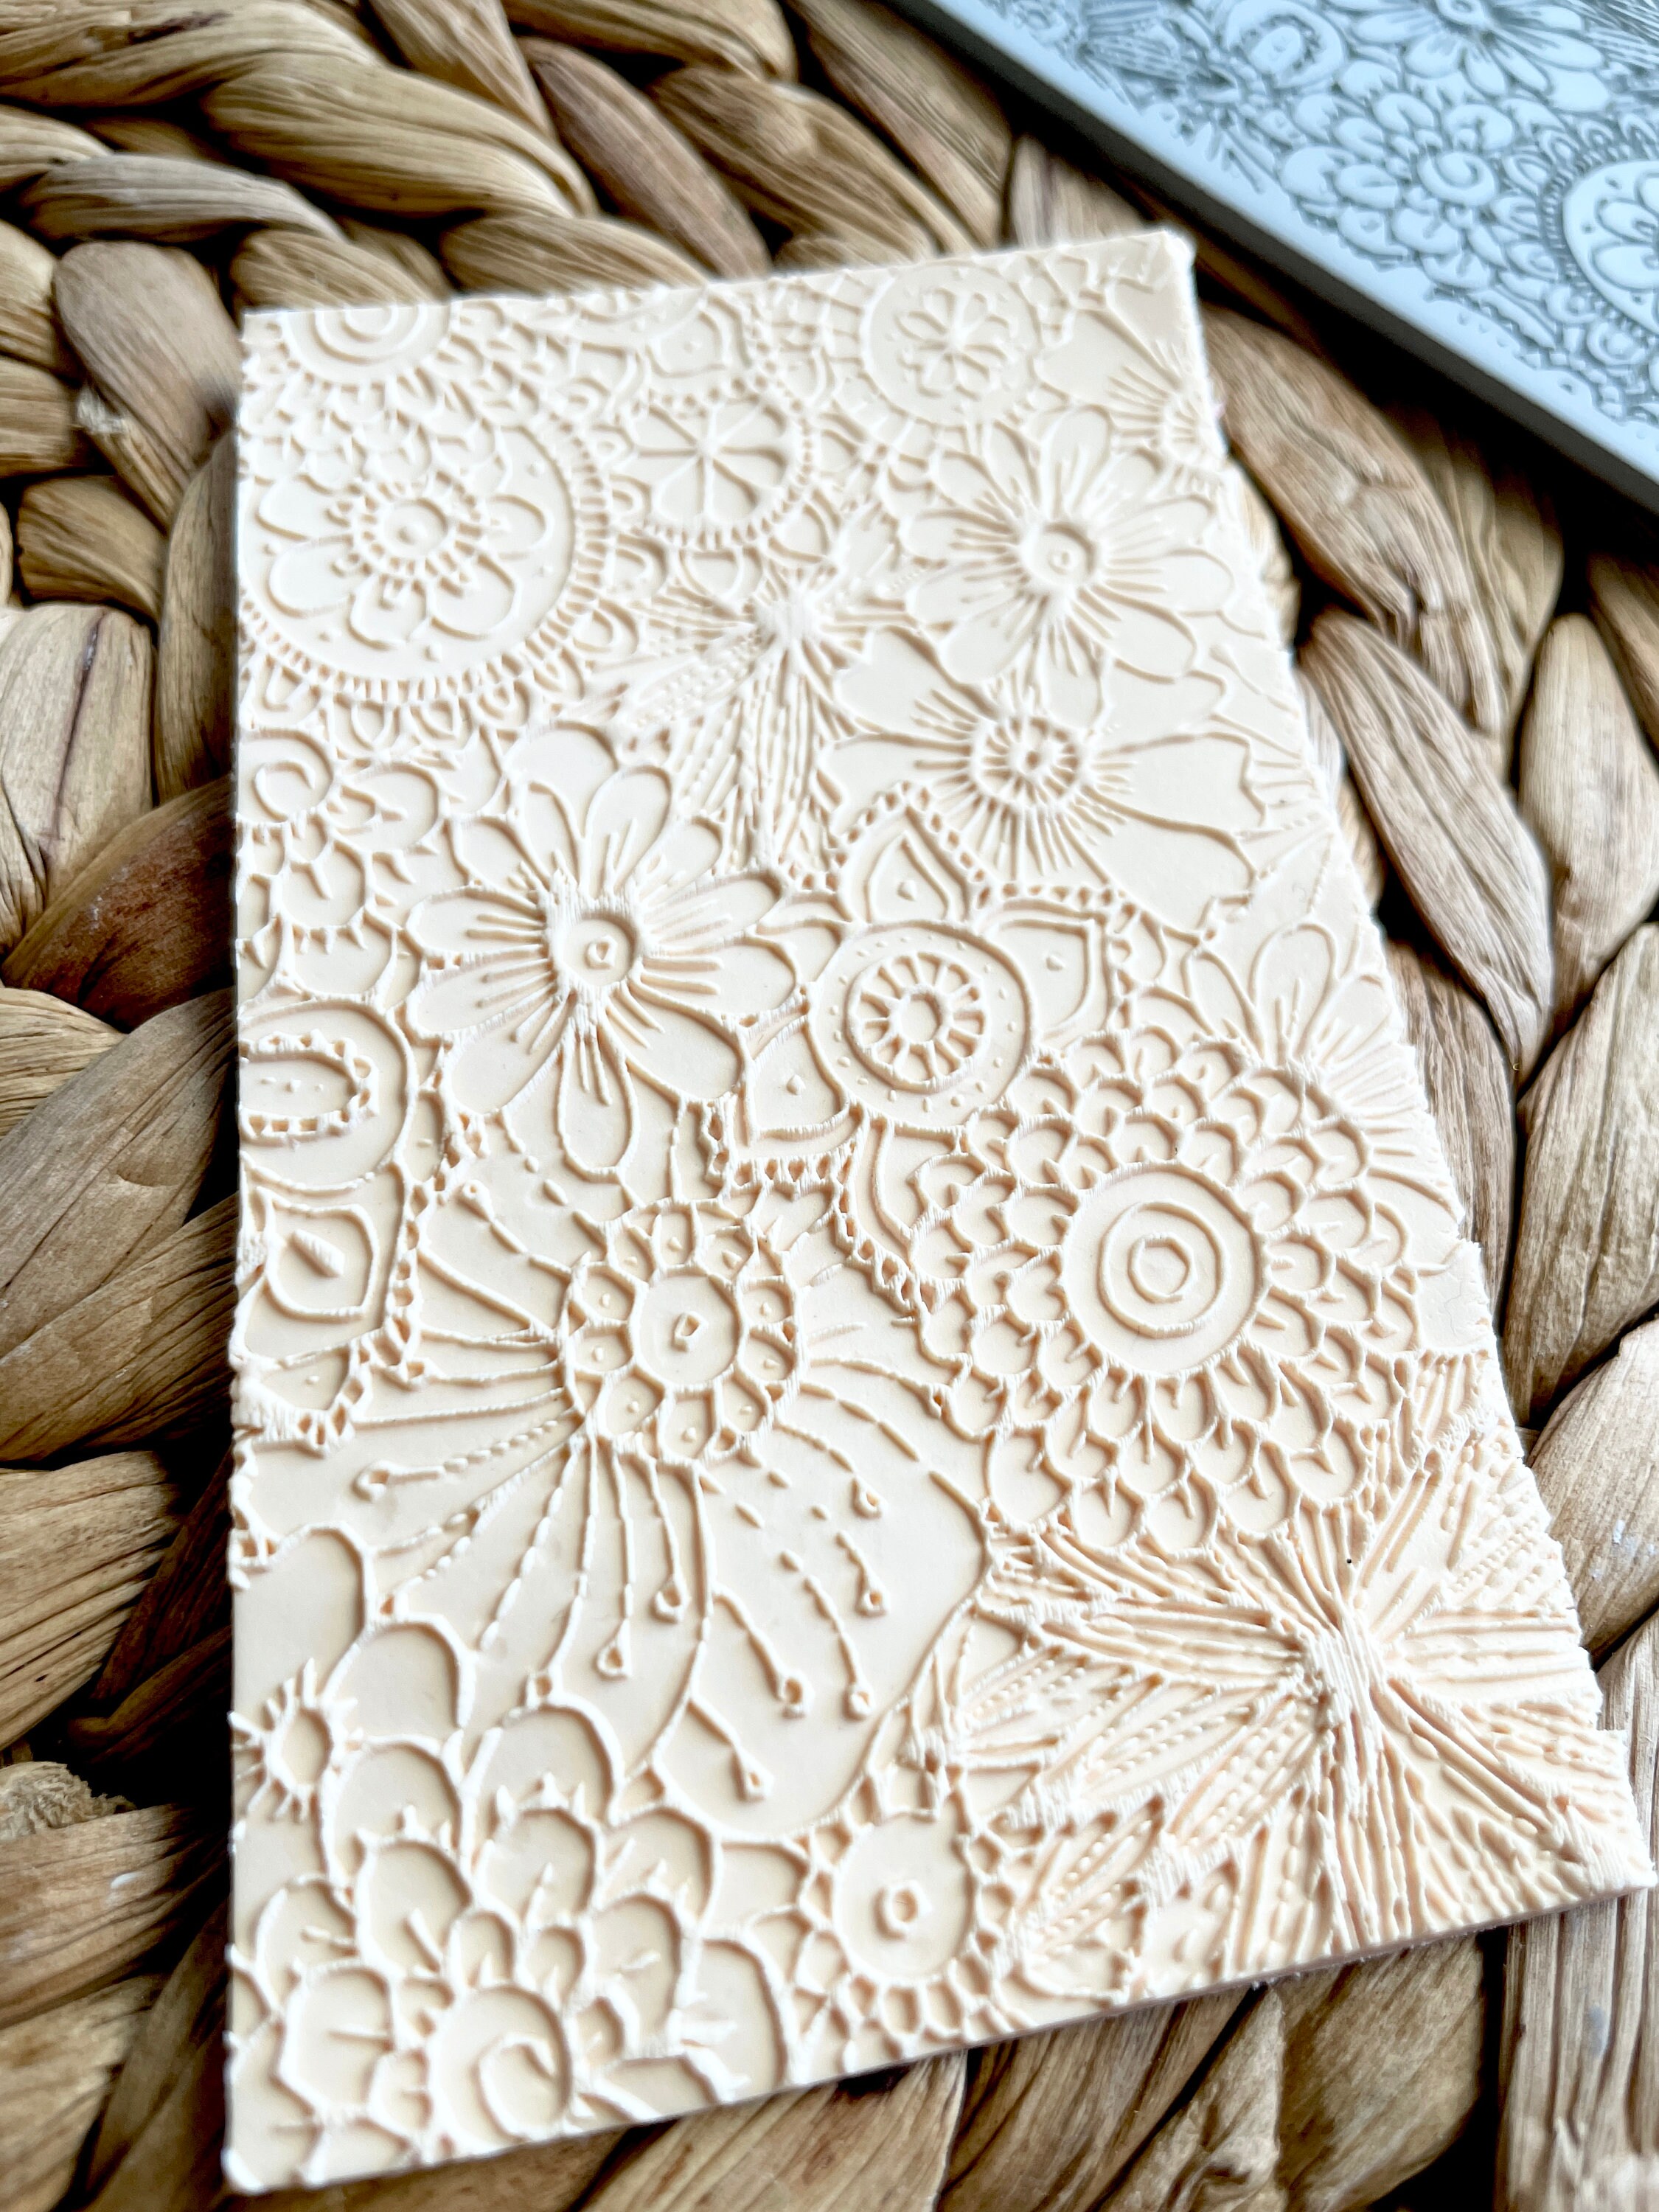 Polymer Clay Texture Mat Leaves Texture Sheet Metal Clay Texture Mat  Embossing Impression Sheet Rose Clay Stamp Ceramic AB 105 